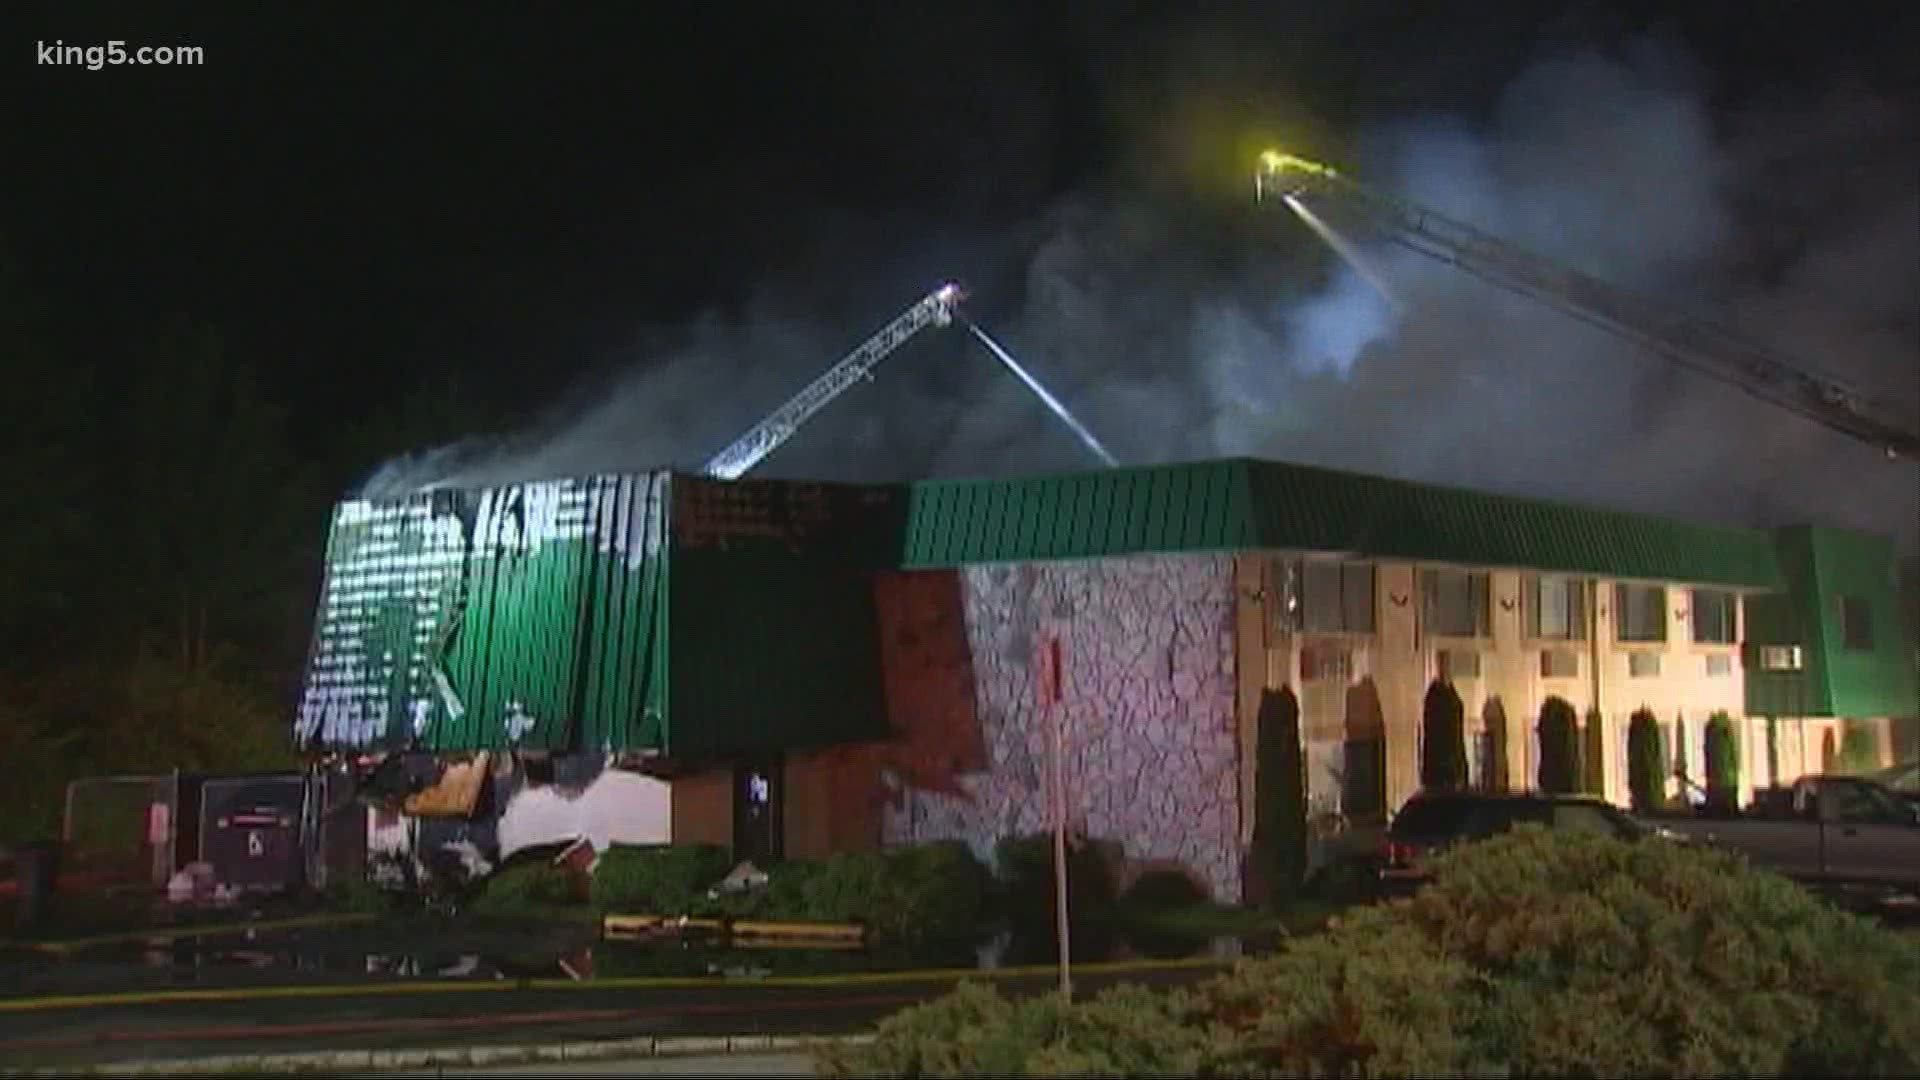 A Quality Inn in Olympia was the scene of an overnight fire.  80 people were evacuated with no injuries reported.